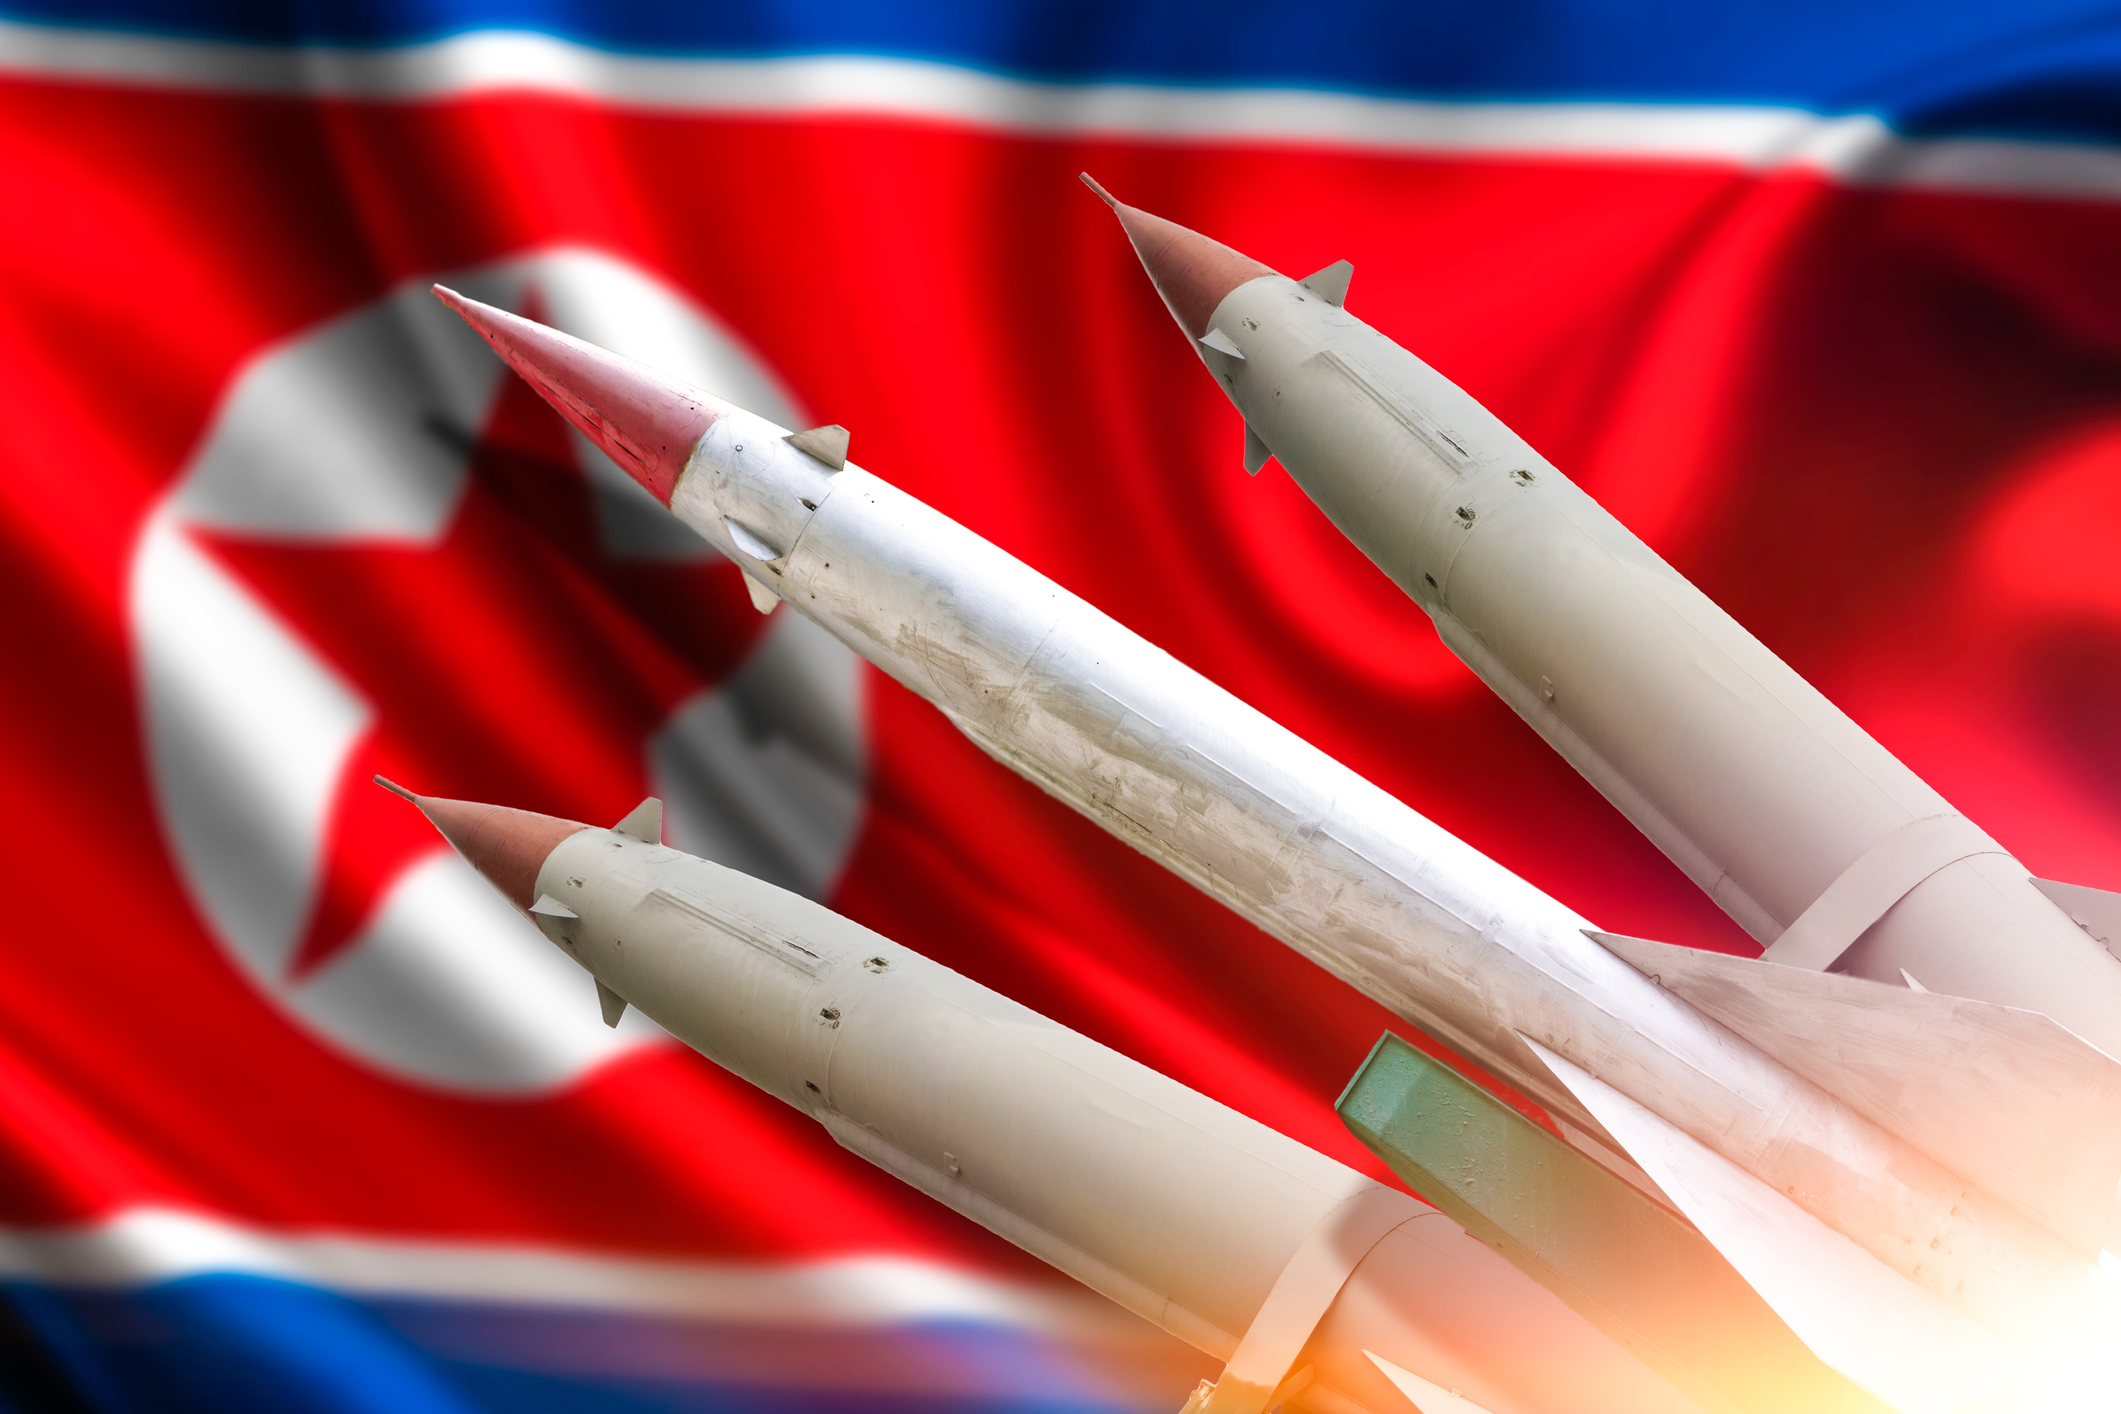 The rocket to launch. The flag of North Korea.